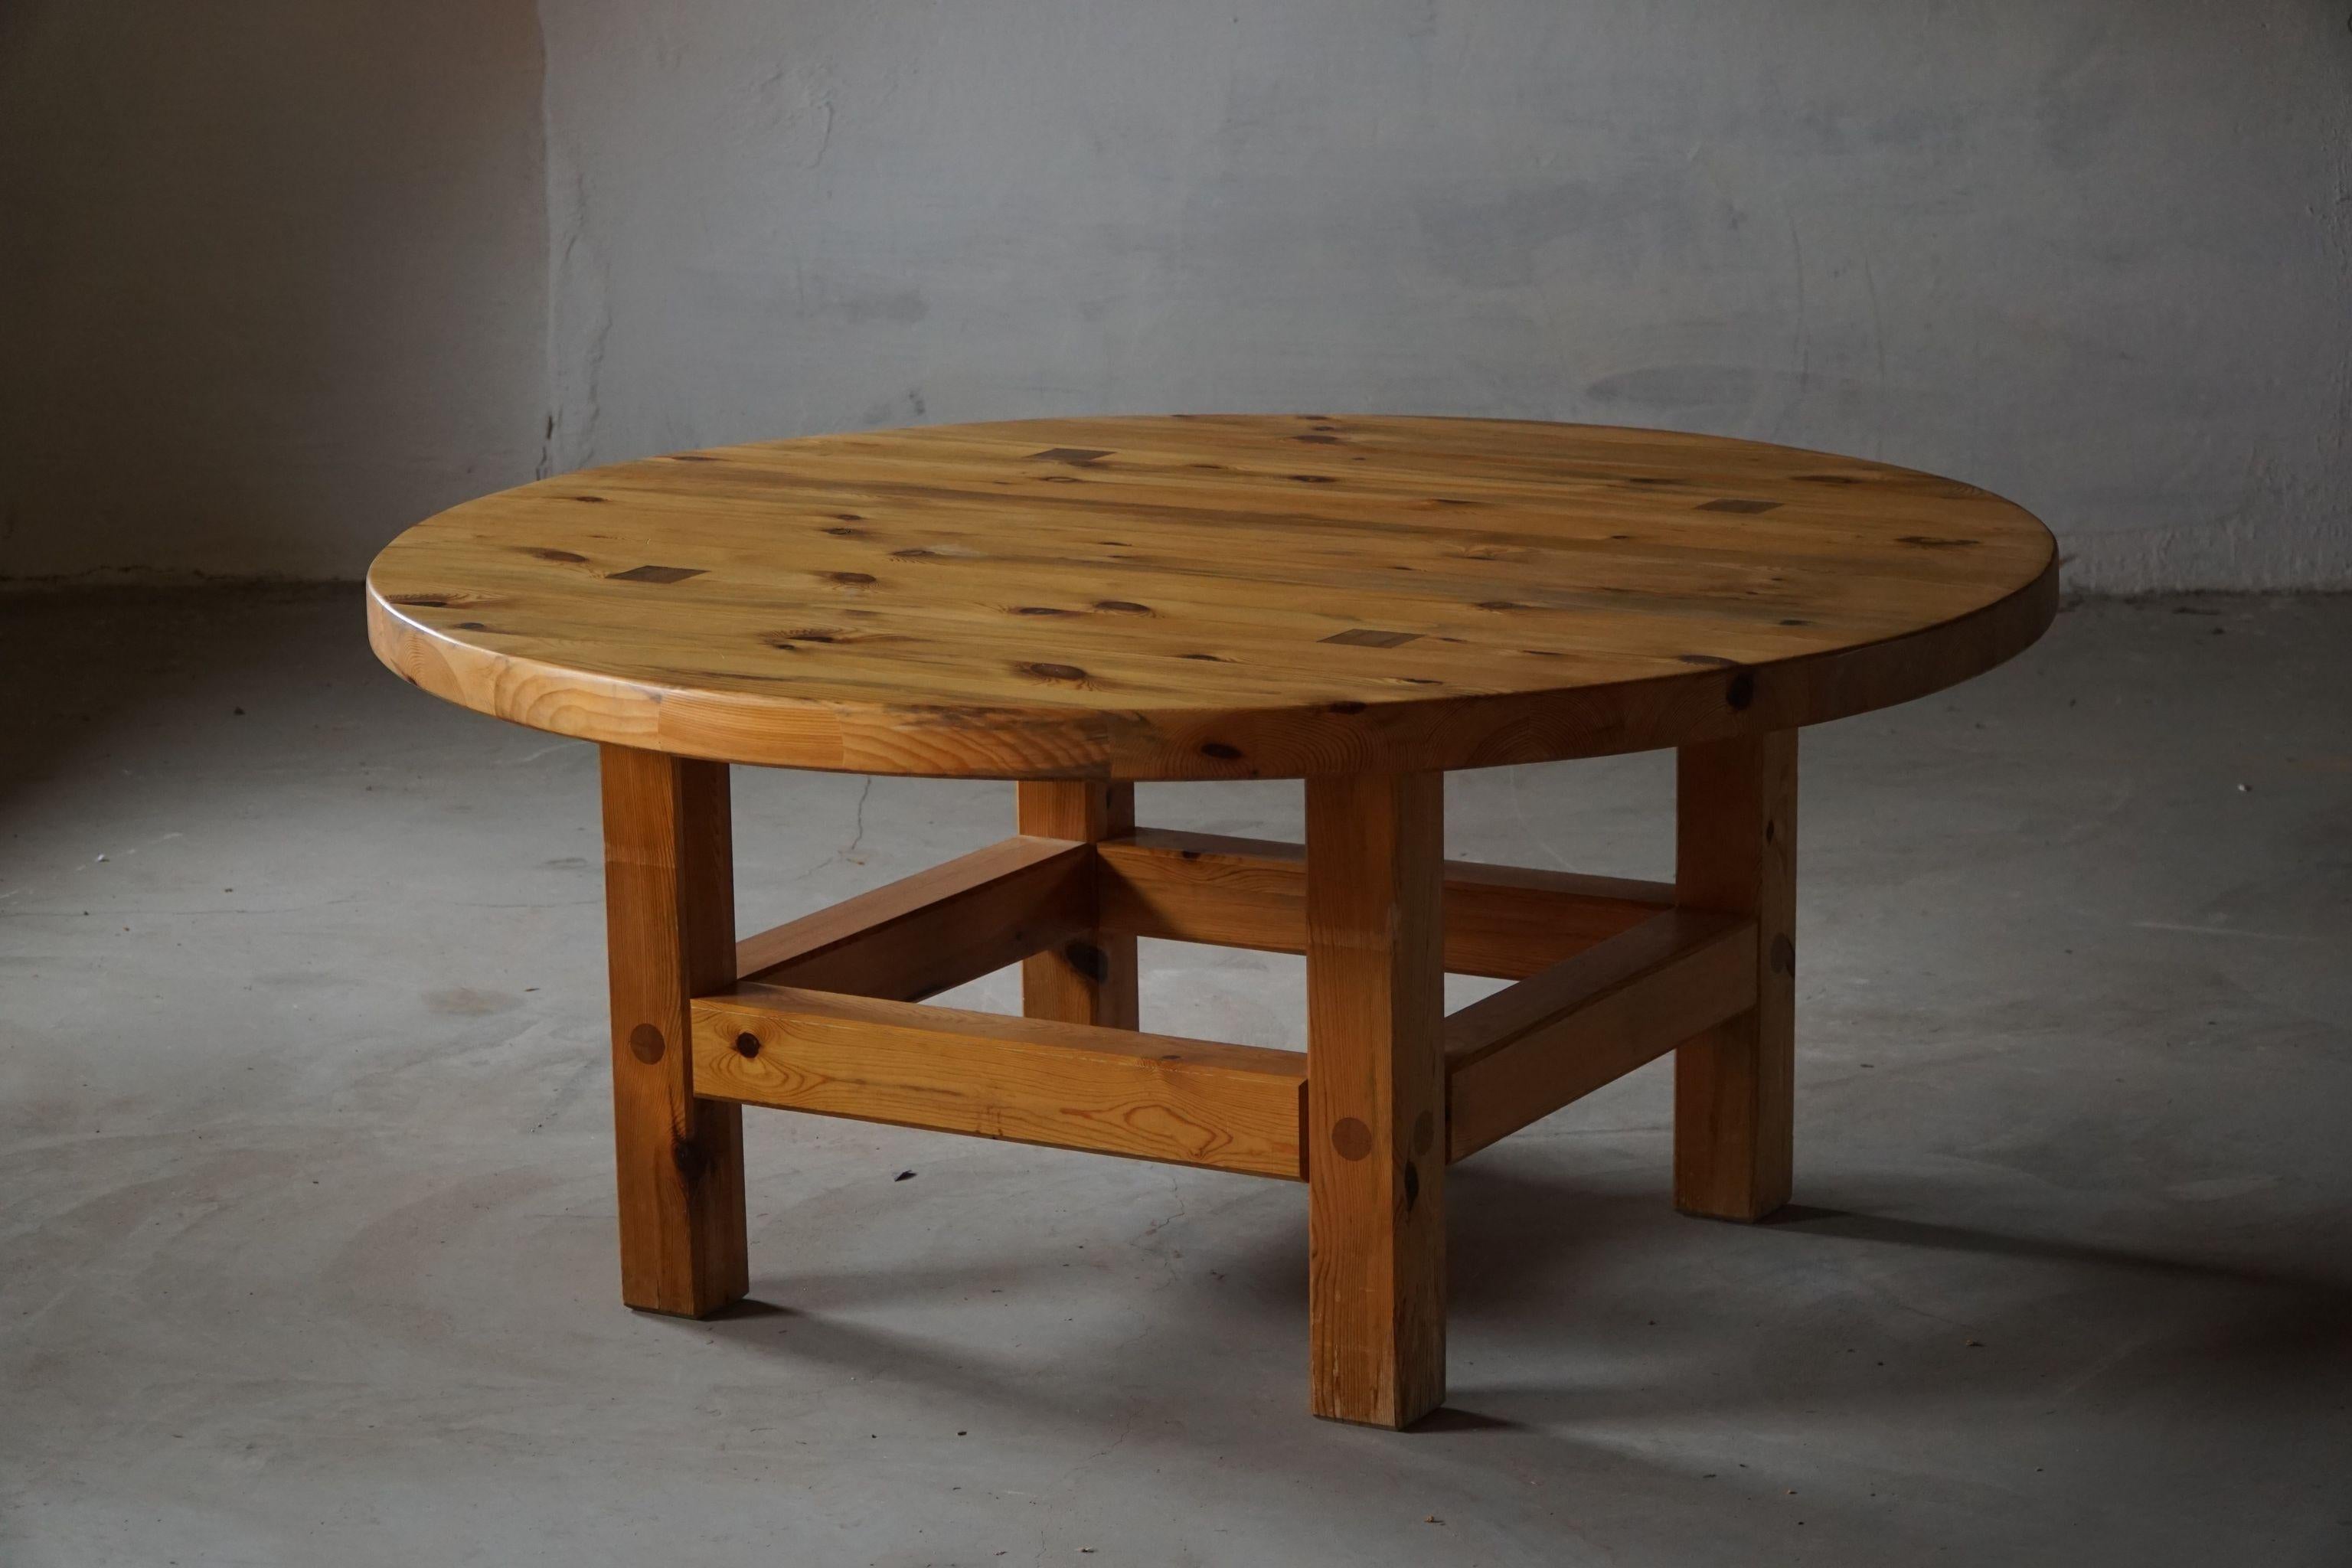 Sven Larsson, Large Round Dining Table in Solid Pine, Swedish Modern, 1960s For Sale 6